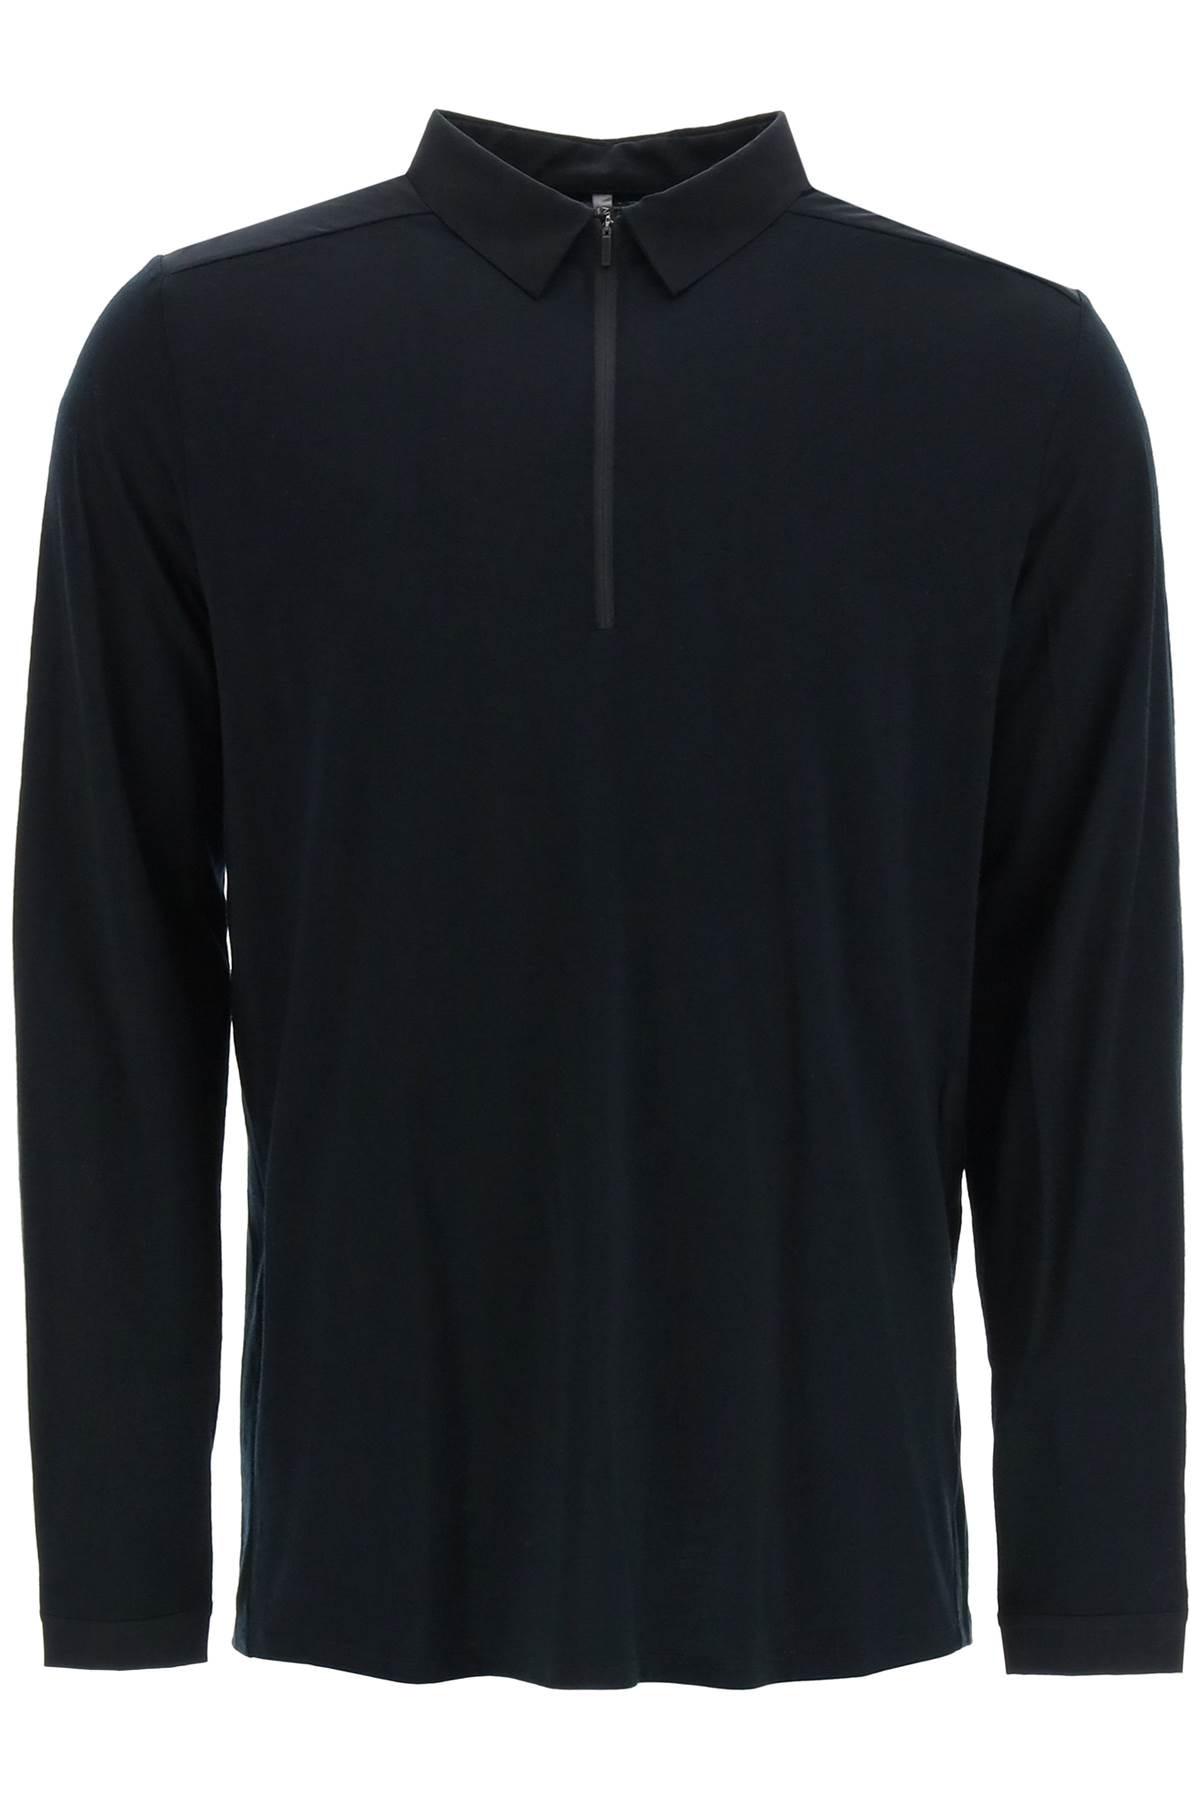 Veilance 'frame' Long Sleeve Polo Shirt In Wool Jersey in Blue for Men ...